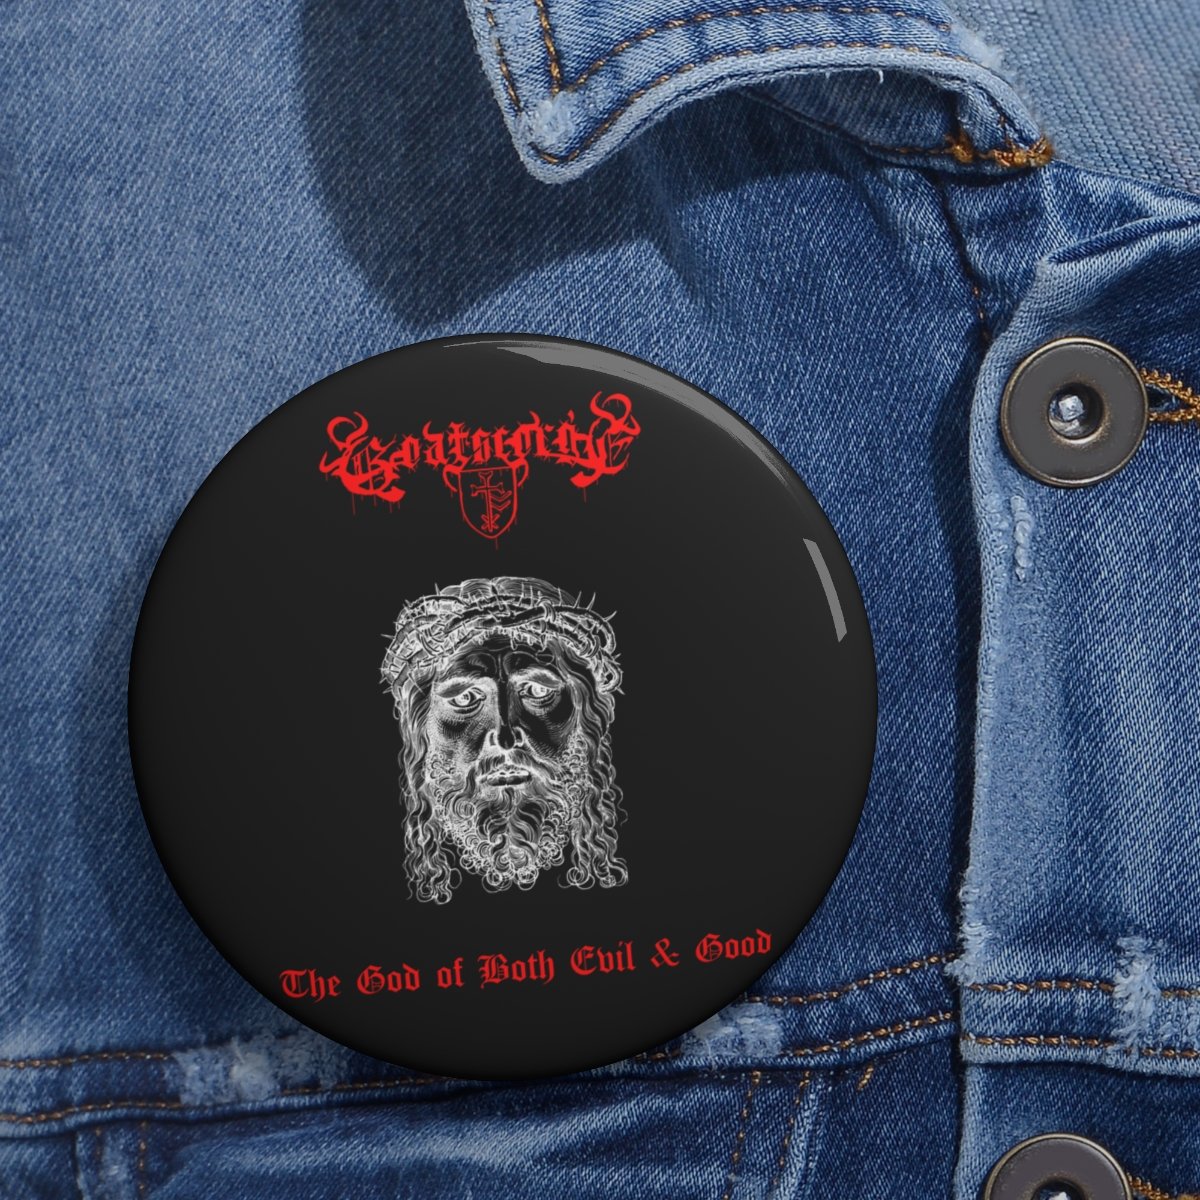 Goatscorge – The God of Both Evil and Good Pin Buttons